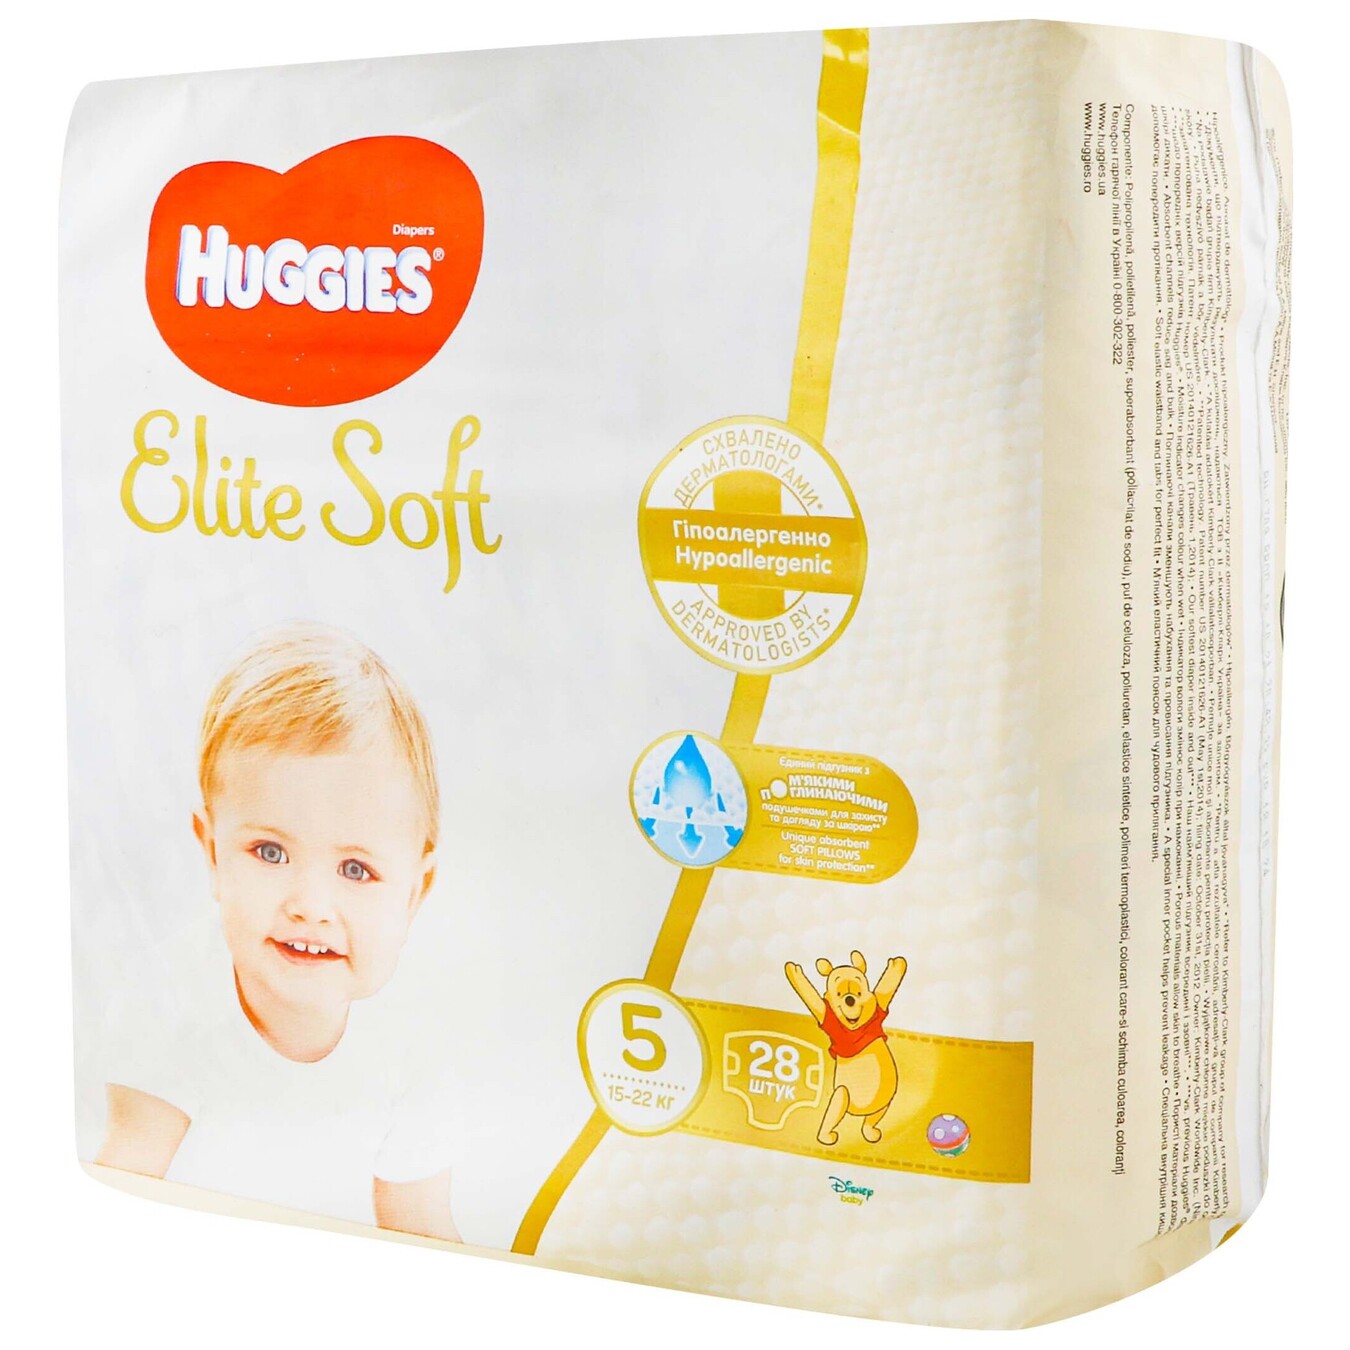 Diapers Huggies elite soft for baby 0 to 3.5кг 25 PCs - AliExpress